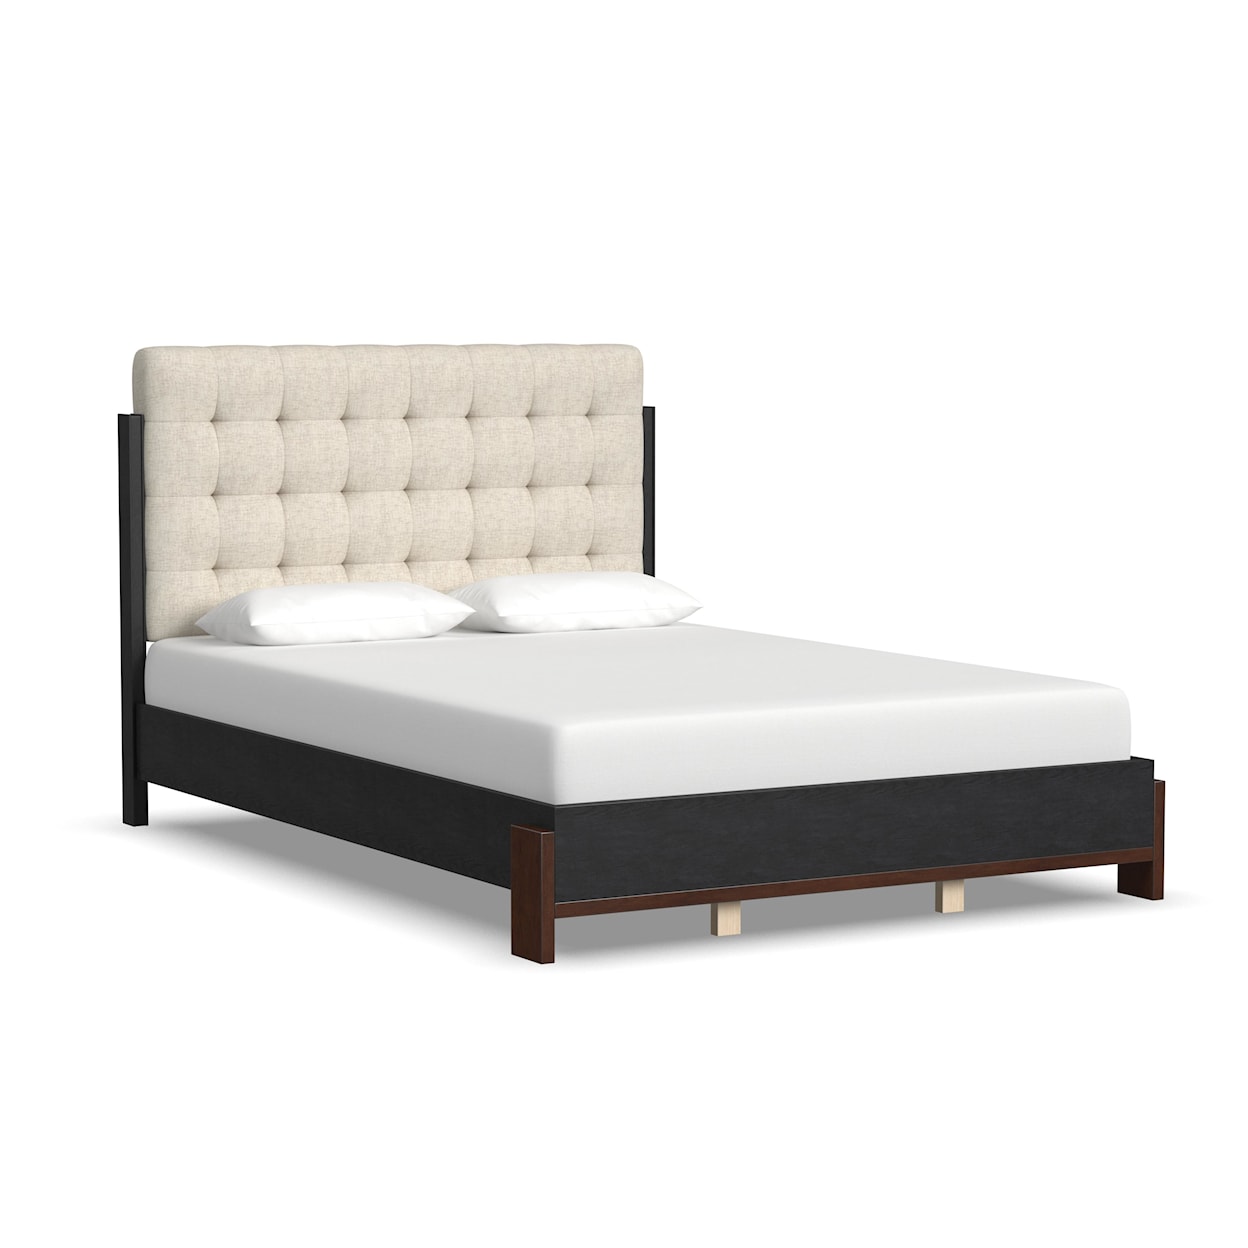 Wynwood, A Flexsteel Company Waterfall Queen Upholstered Bed